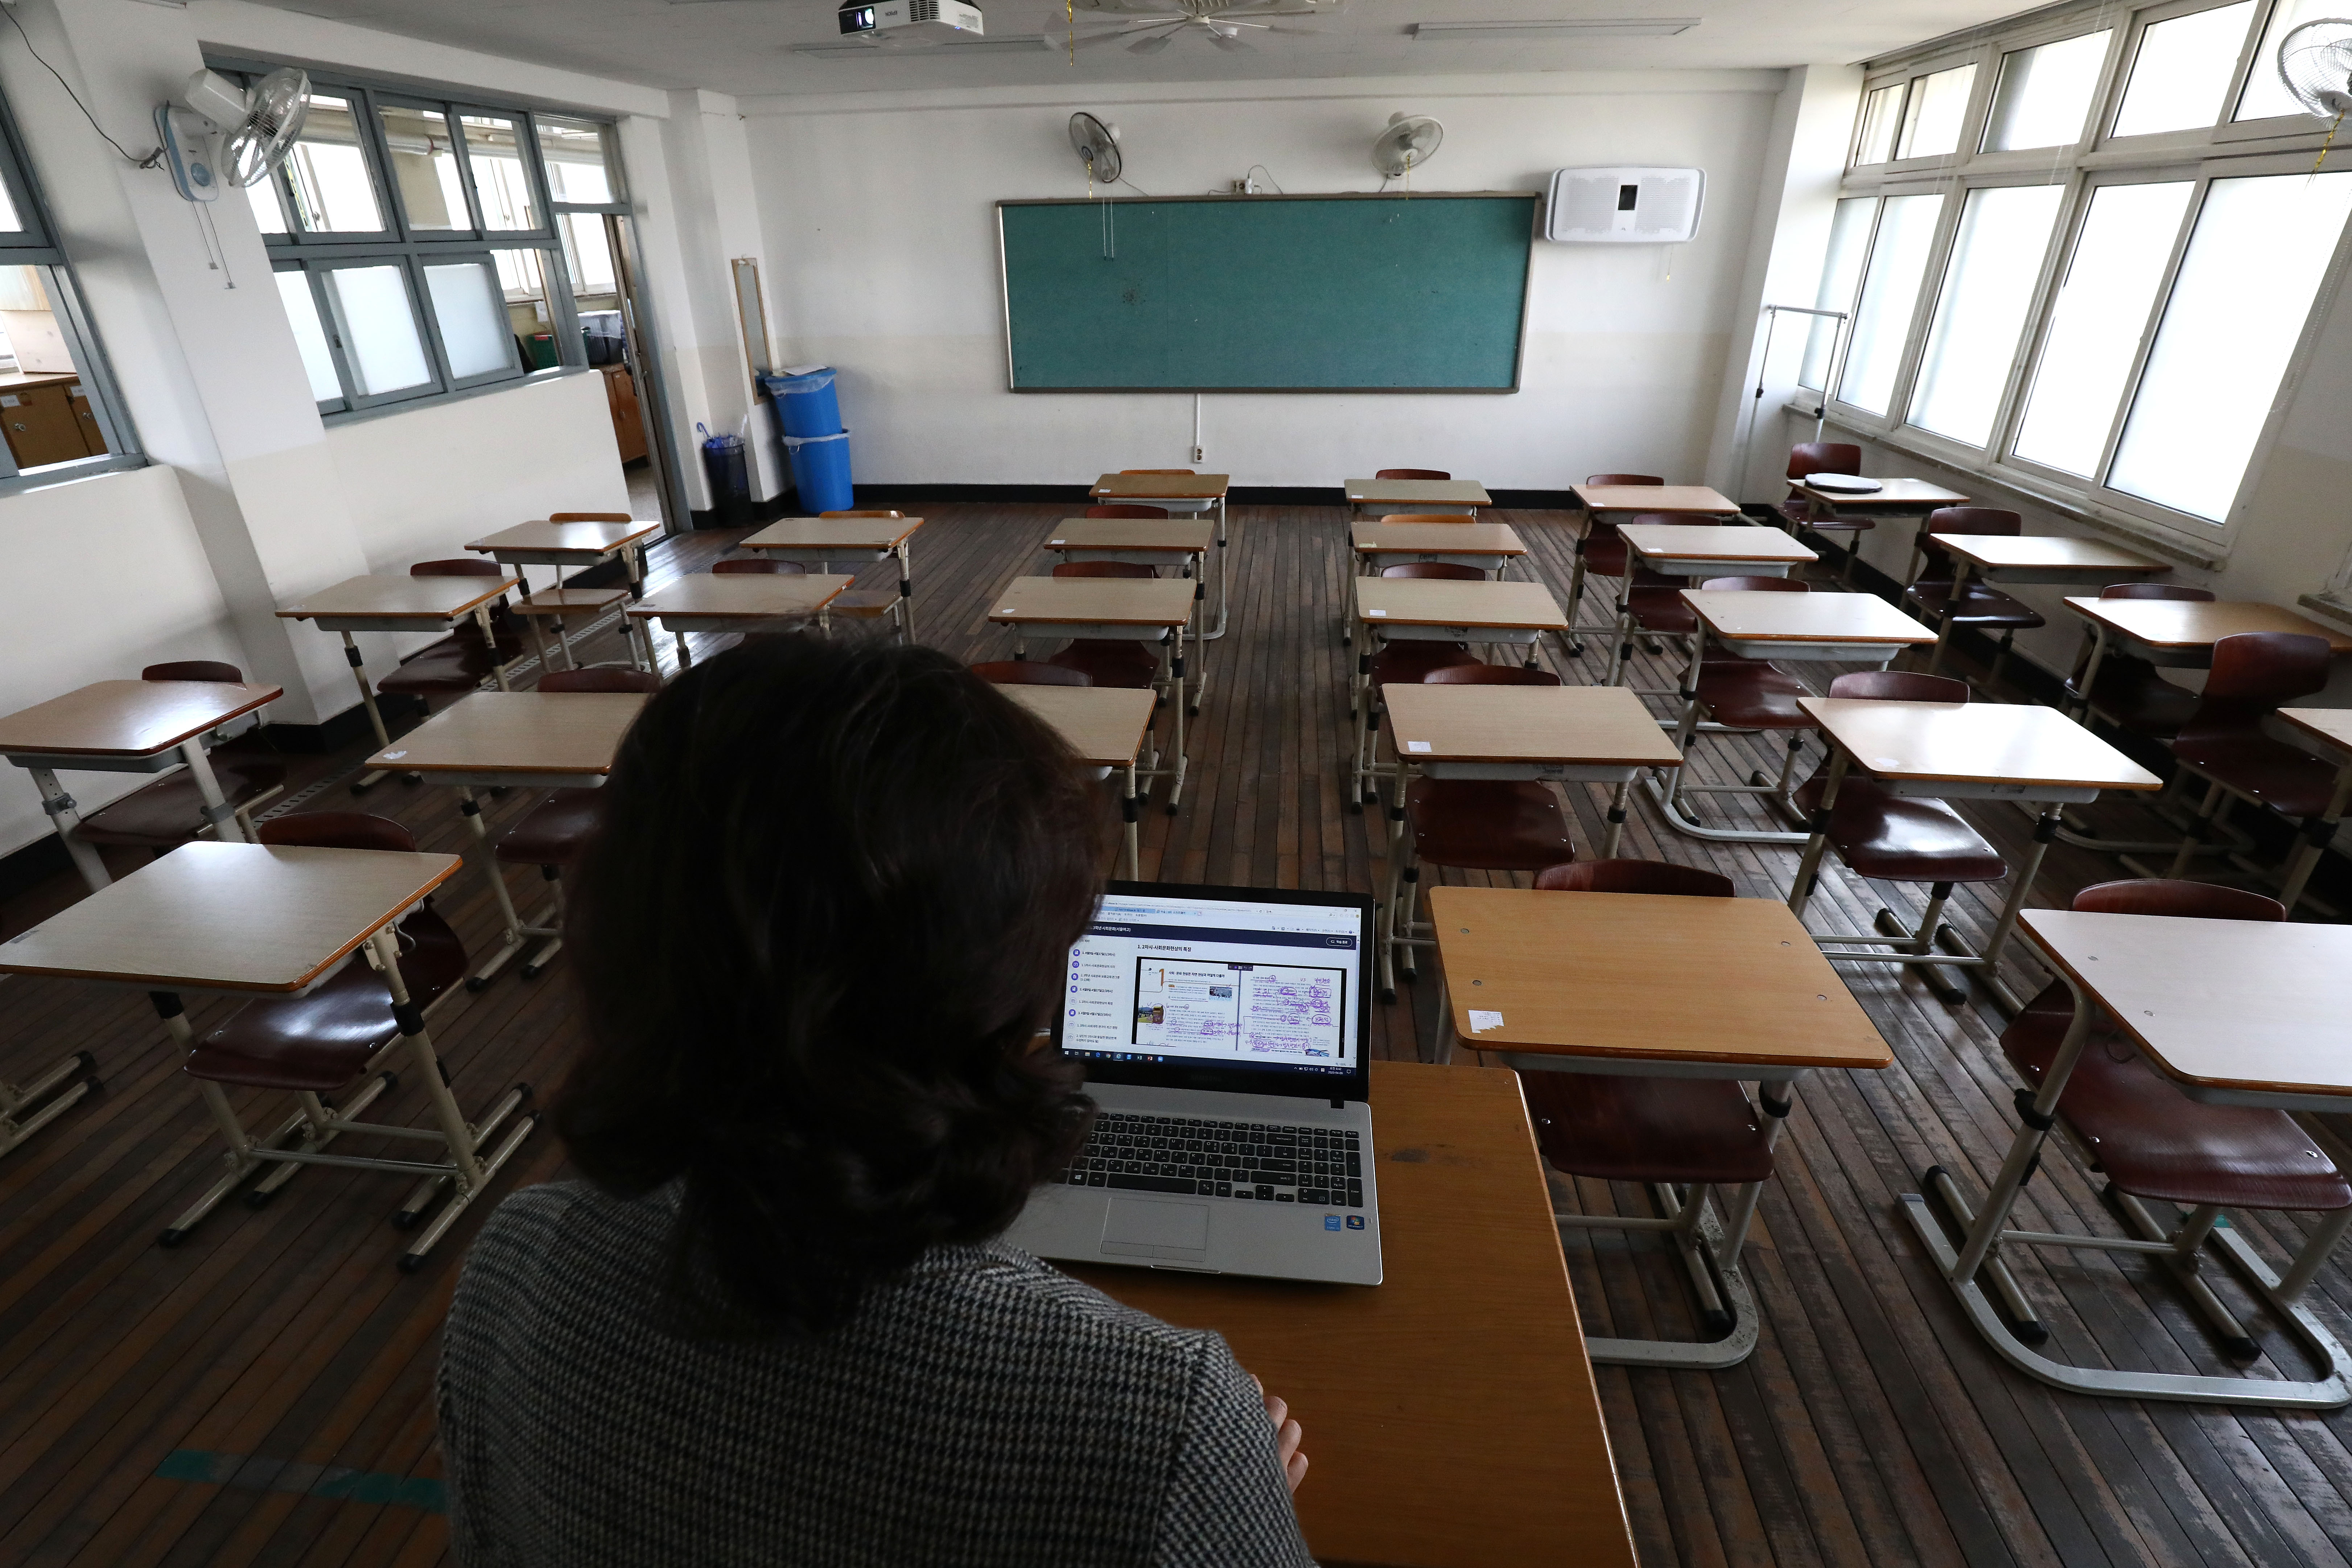 A teacher wears a mask as she gives a lesson on the first day of online class in an empty classroom as South Koreans take measures to protect themselves against the spread of coronavirus (COVID-19) at Seoul Girls High School on April 09, 2020 in Seoul, South Korea. South Korea started the new school year in stages from today, beginning with online classes for middle and high school senior students. South Korea has called for expanded public participation in social distancing, as the country witnesses a wave of community spread and imported infections leading to a resurgence in new cases of COVID-19. According to the Korea Center for Disease Control and Prevention, 39 new cases were reported. The total number of infections in the nation tallies at 10,423. (Photo by Chung Sung-Jun/Getty Images)